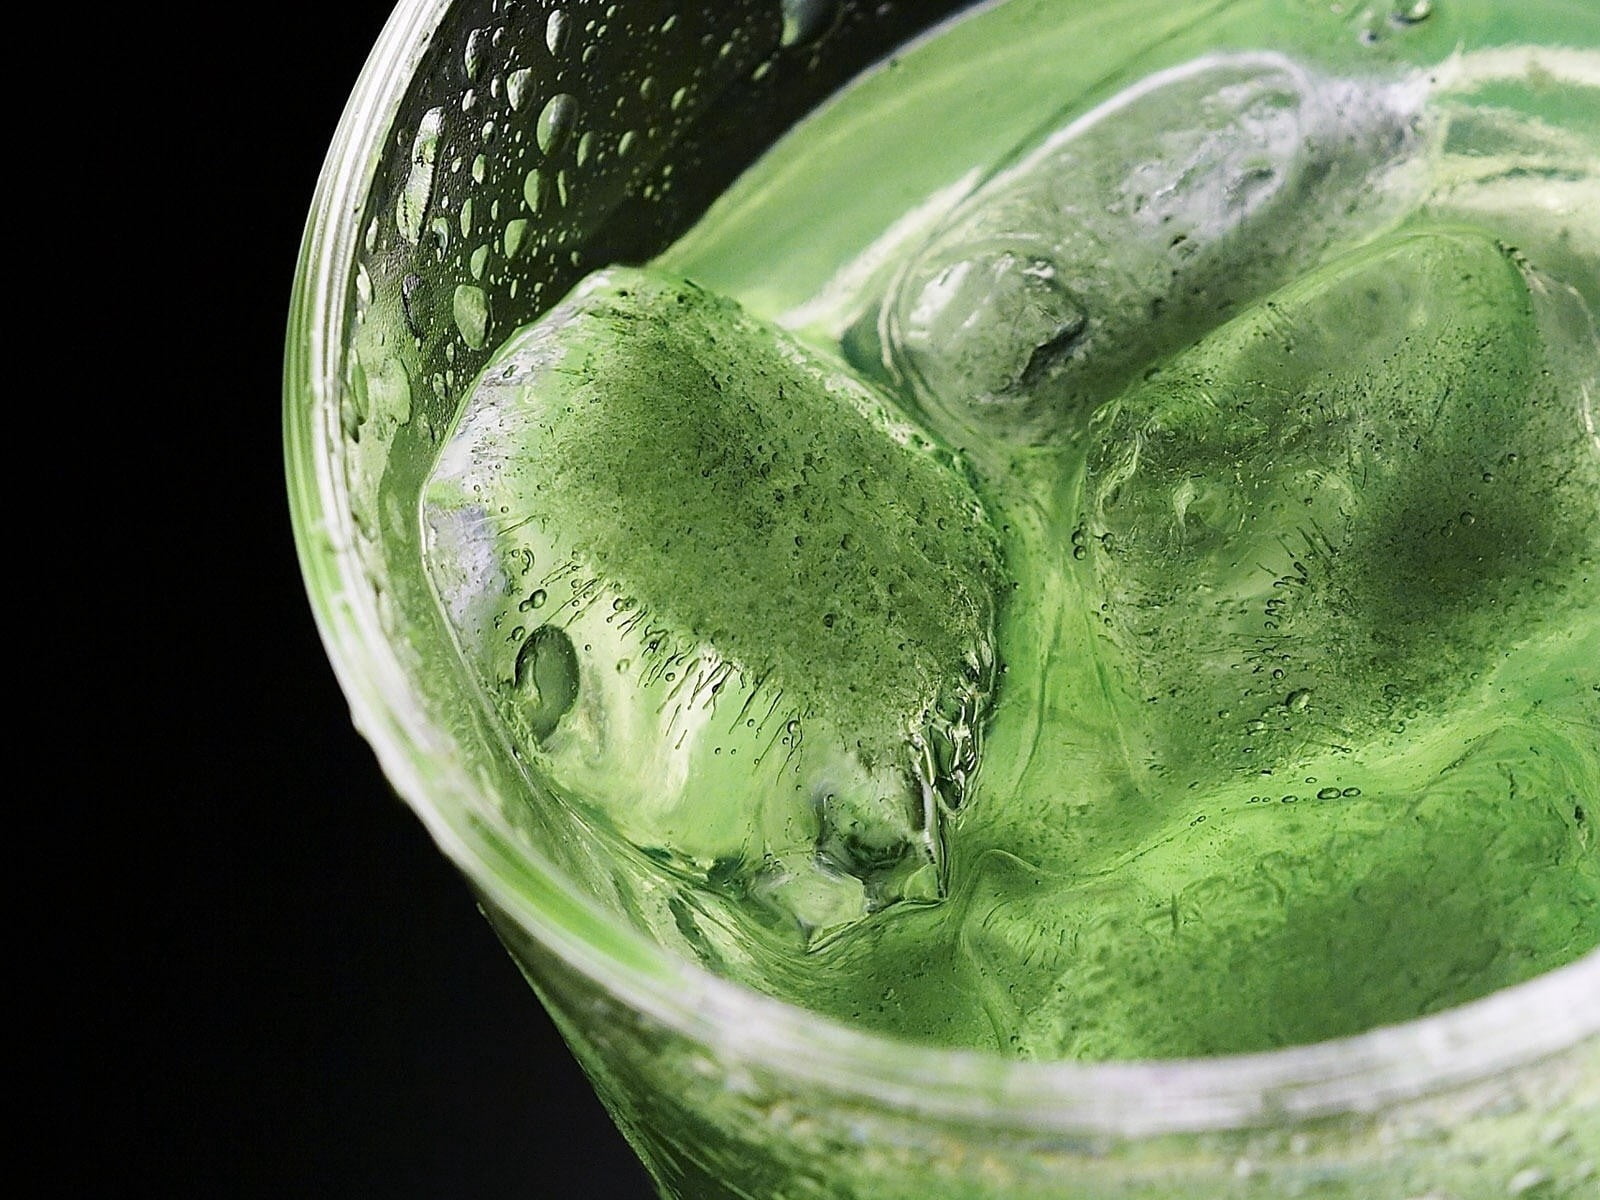 lime juice, drink, green, glass, liquid, freshness, close-up